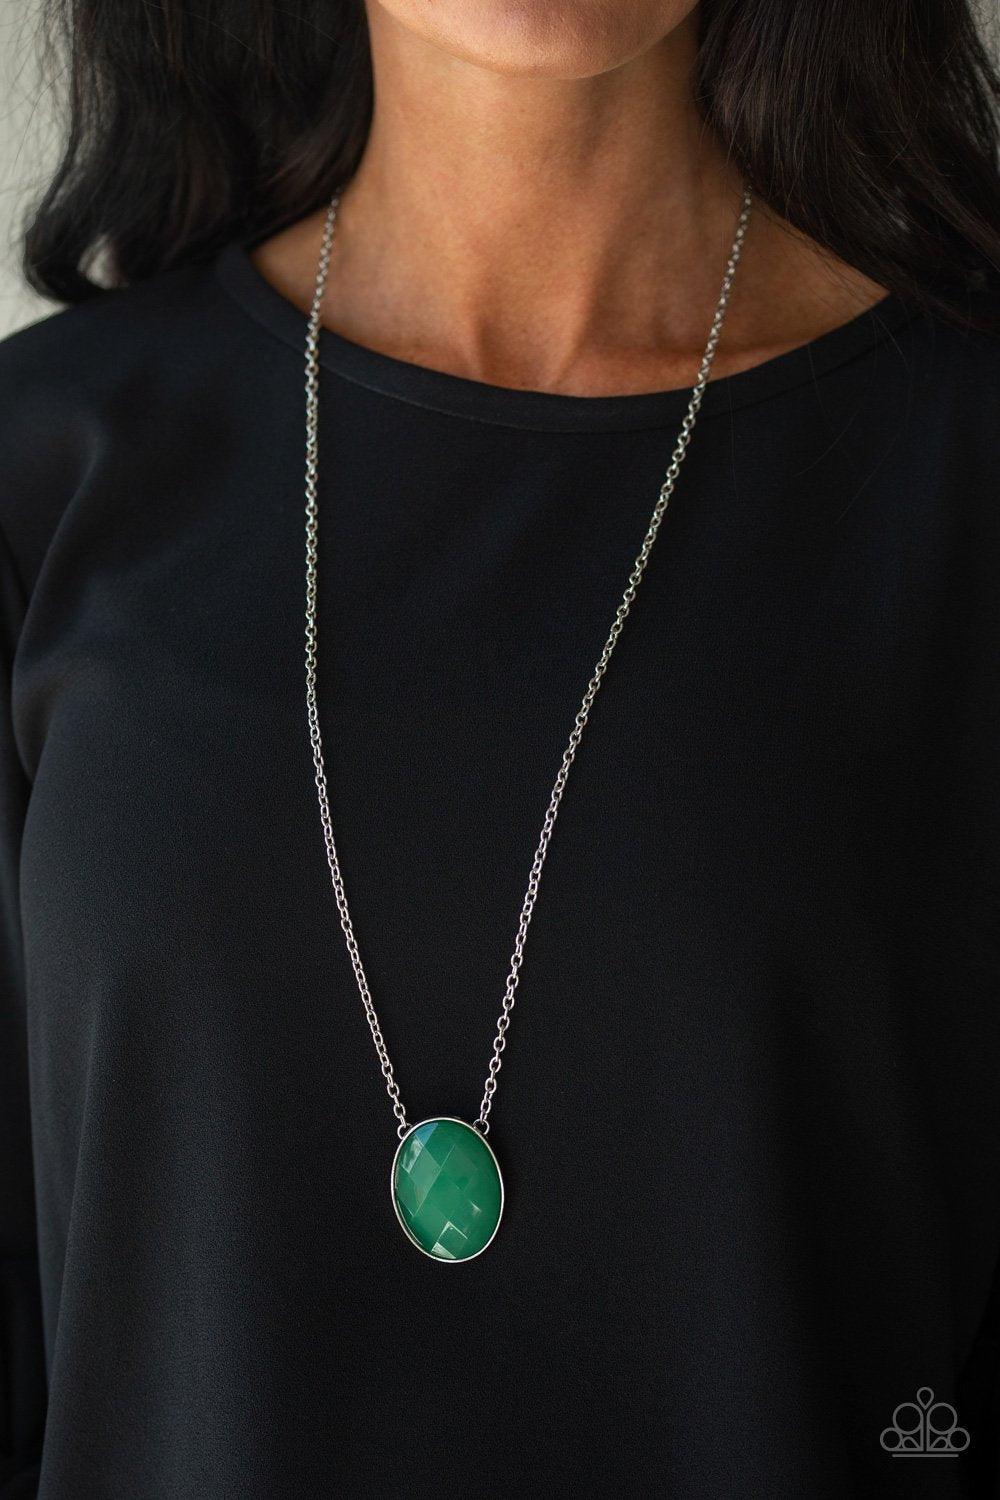 Intensely Illuminated Green Necklace - Jewelry by Bretta